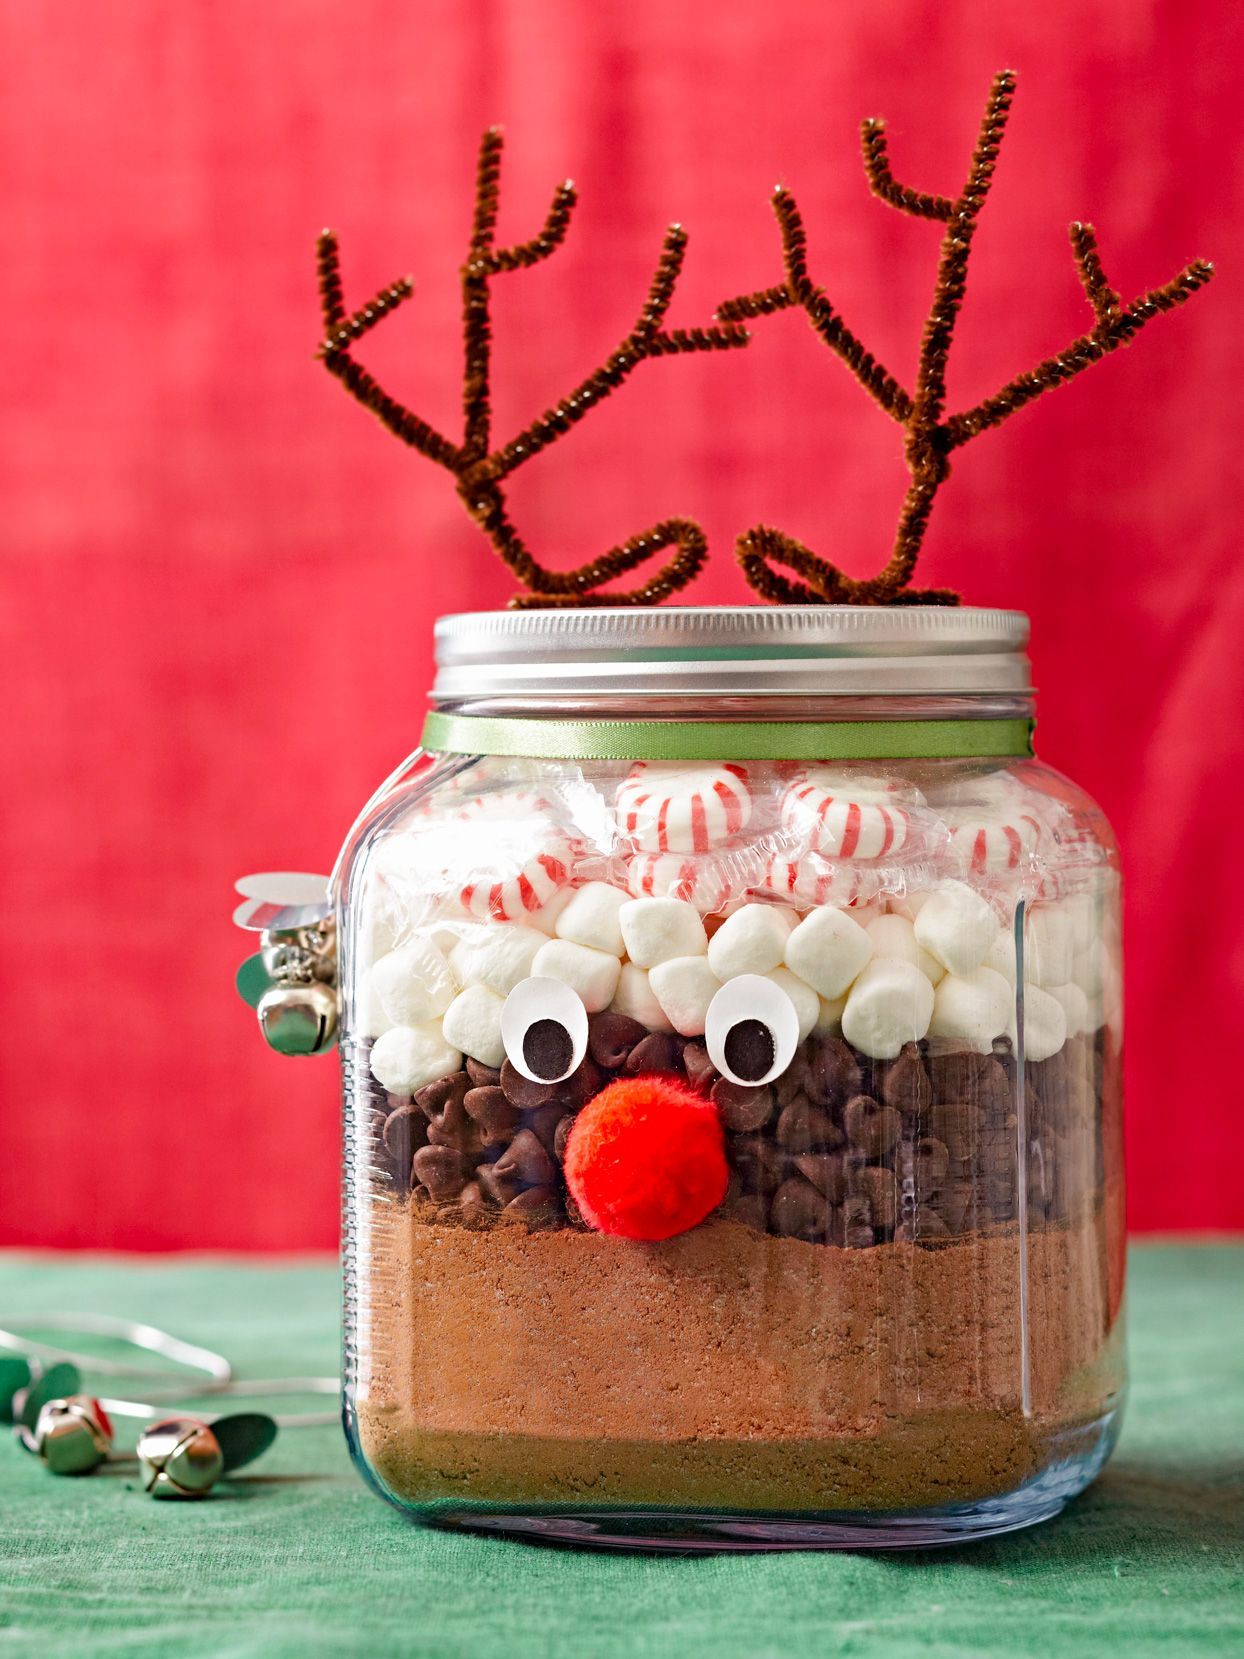 51 DIY Food Gifts Way Sweeter Than Store-Bought